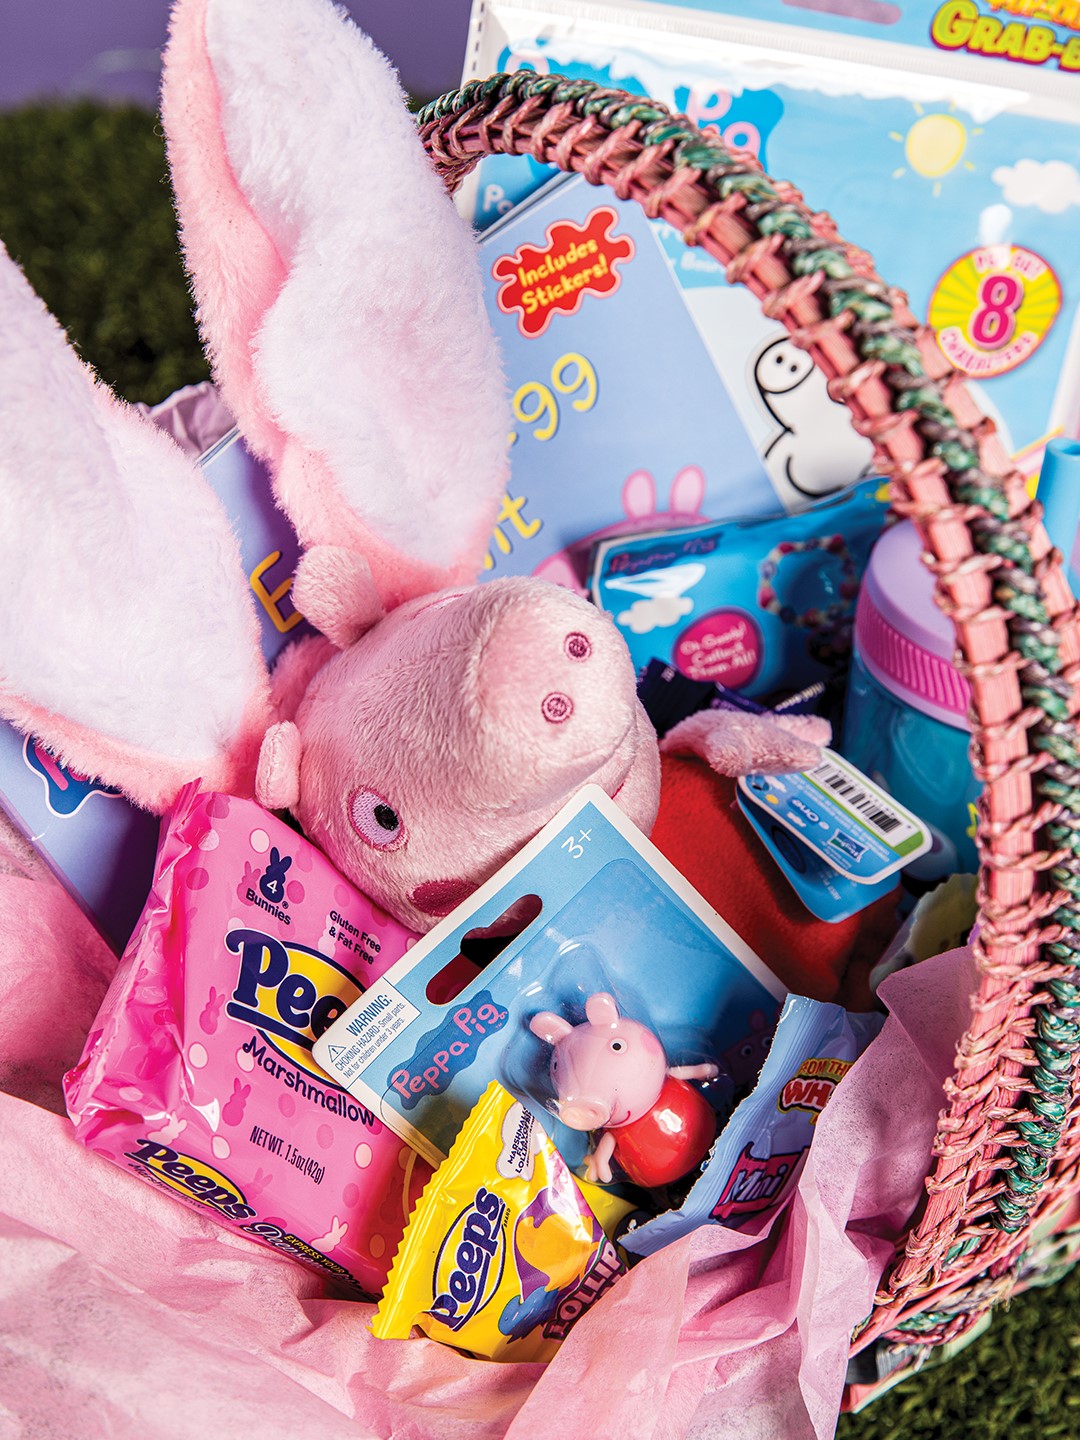 Jessie Takkunen’s Easter baskets typically include candy, playful characters, books and more.